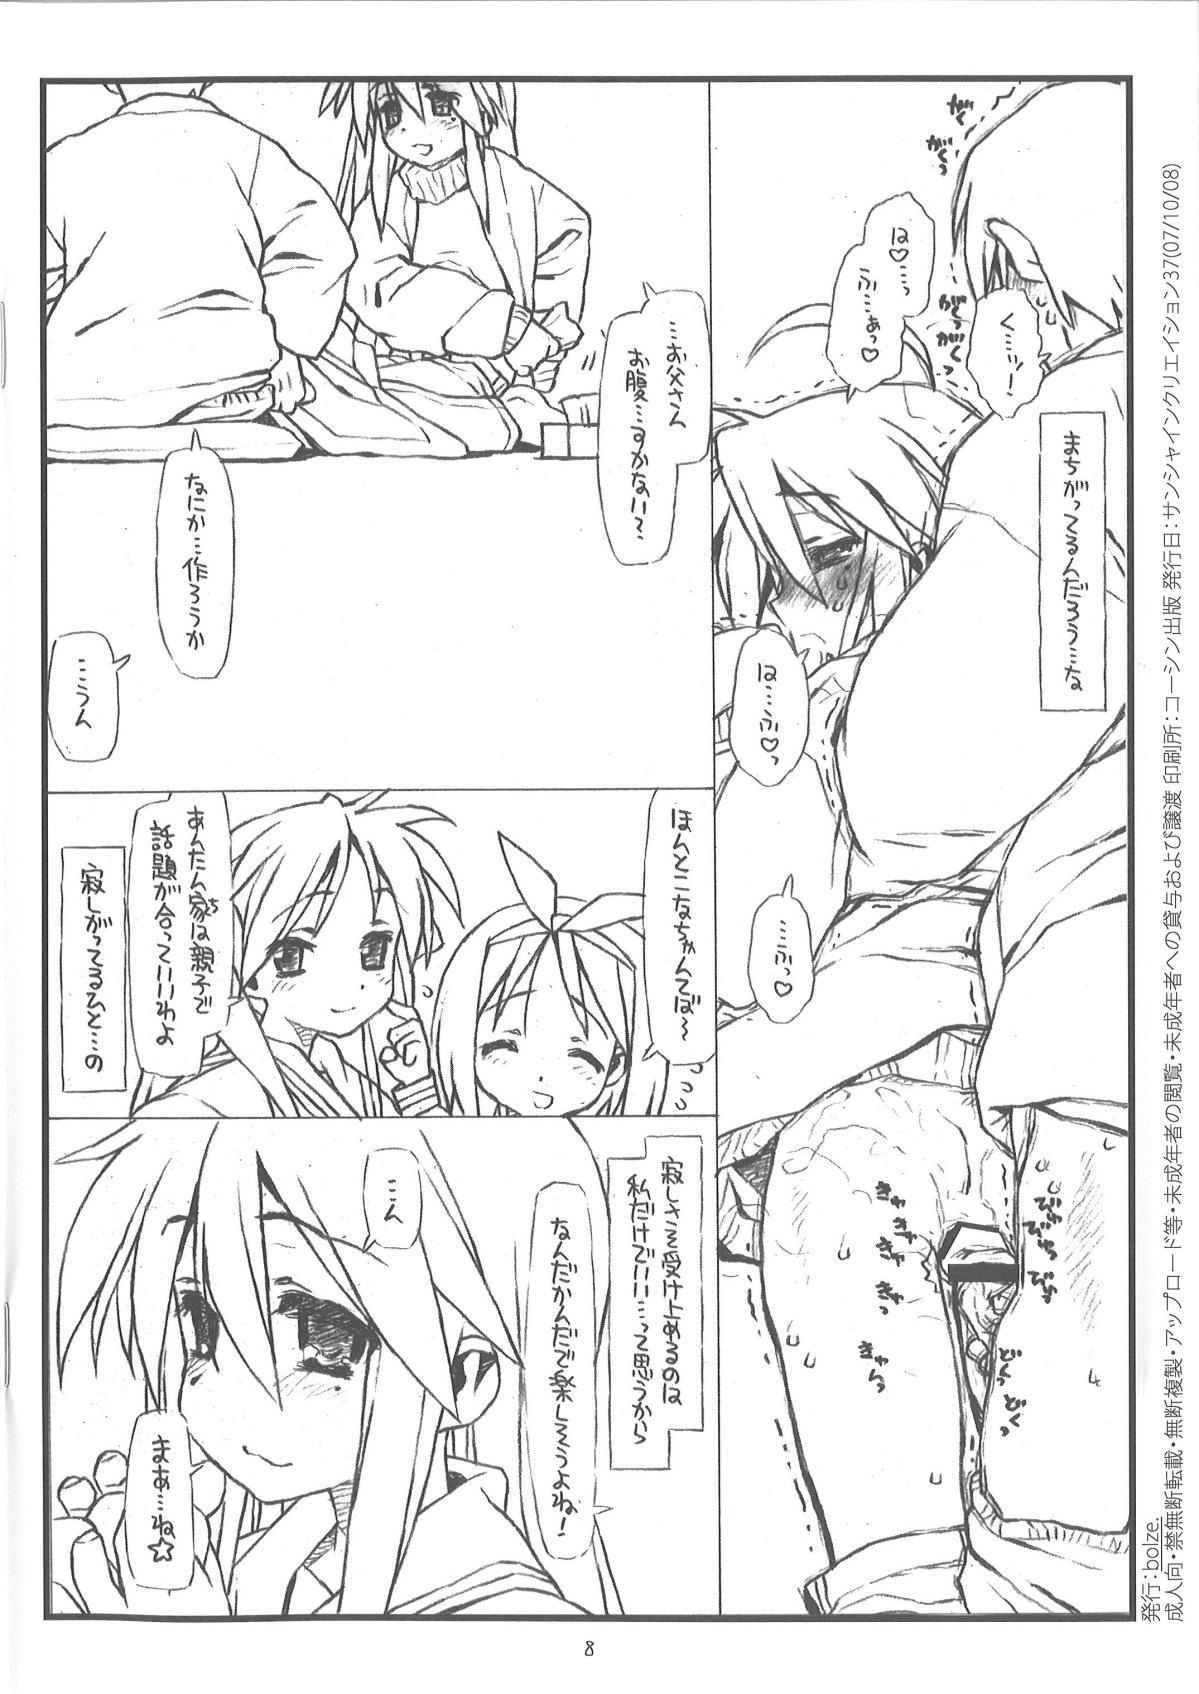 Woman Fucking Happy Unlucky - Lucky star Blow Job Contest - Page 8